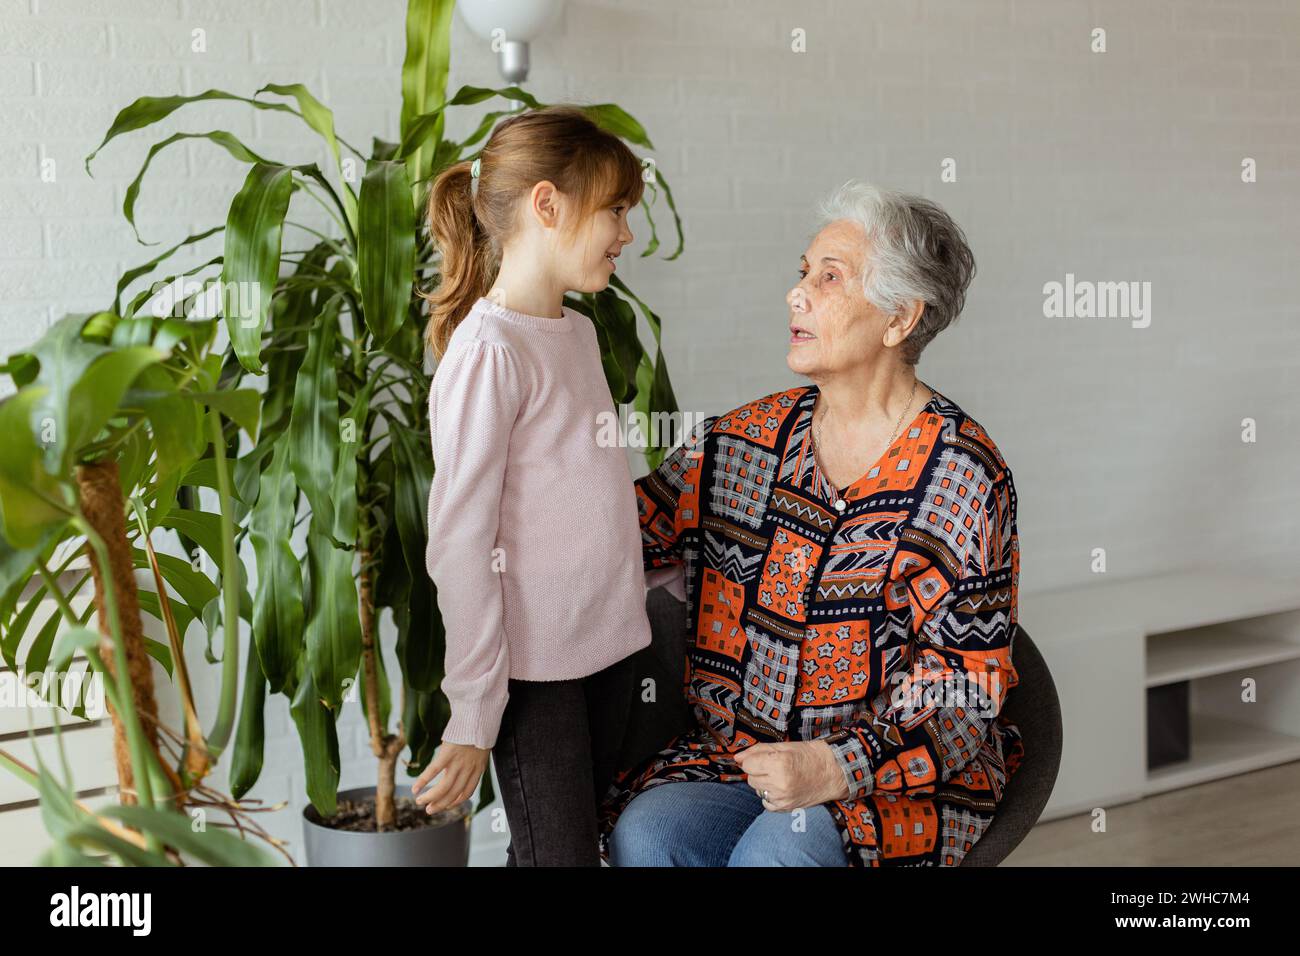 In a softly-lit room, a young girl stands beside a potted plant, sharing a moment of connection and conversation with her elderly grandmother, the joy Stock Photo